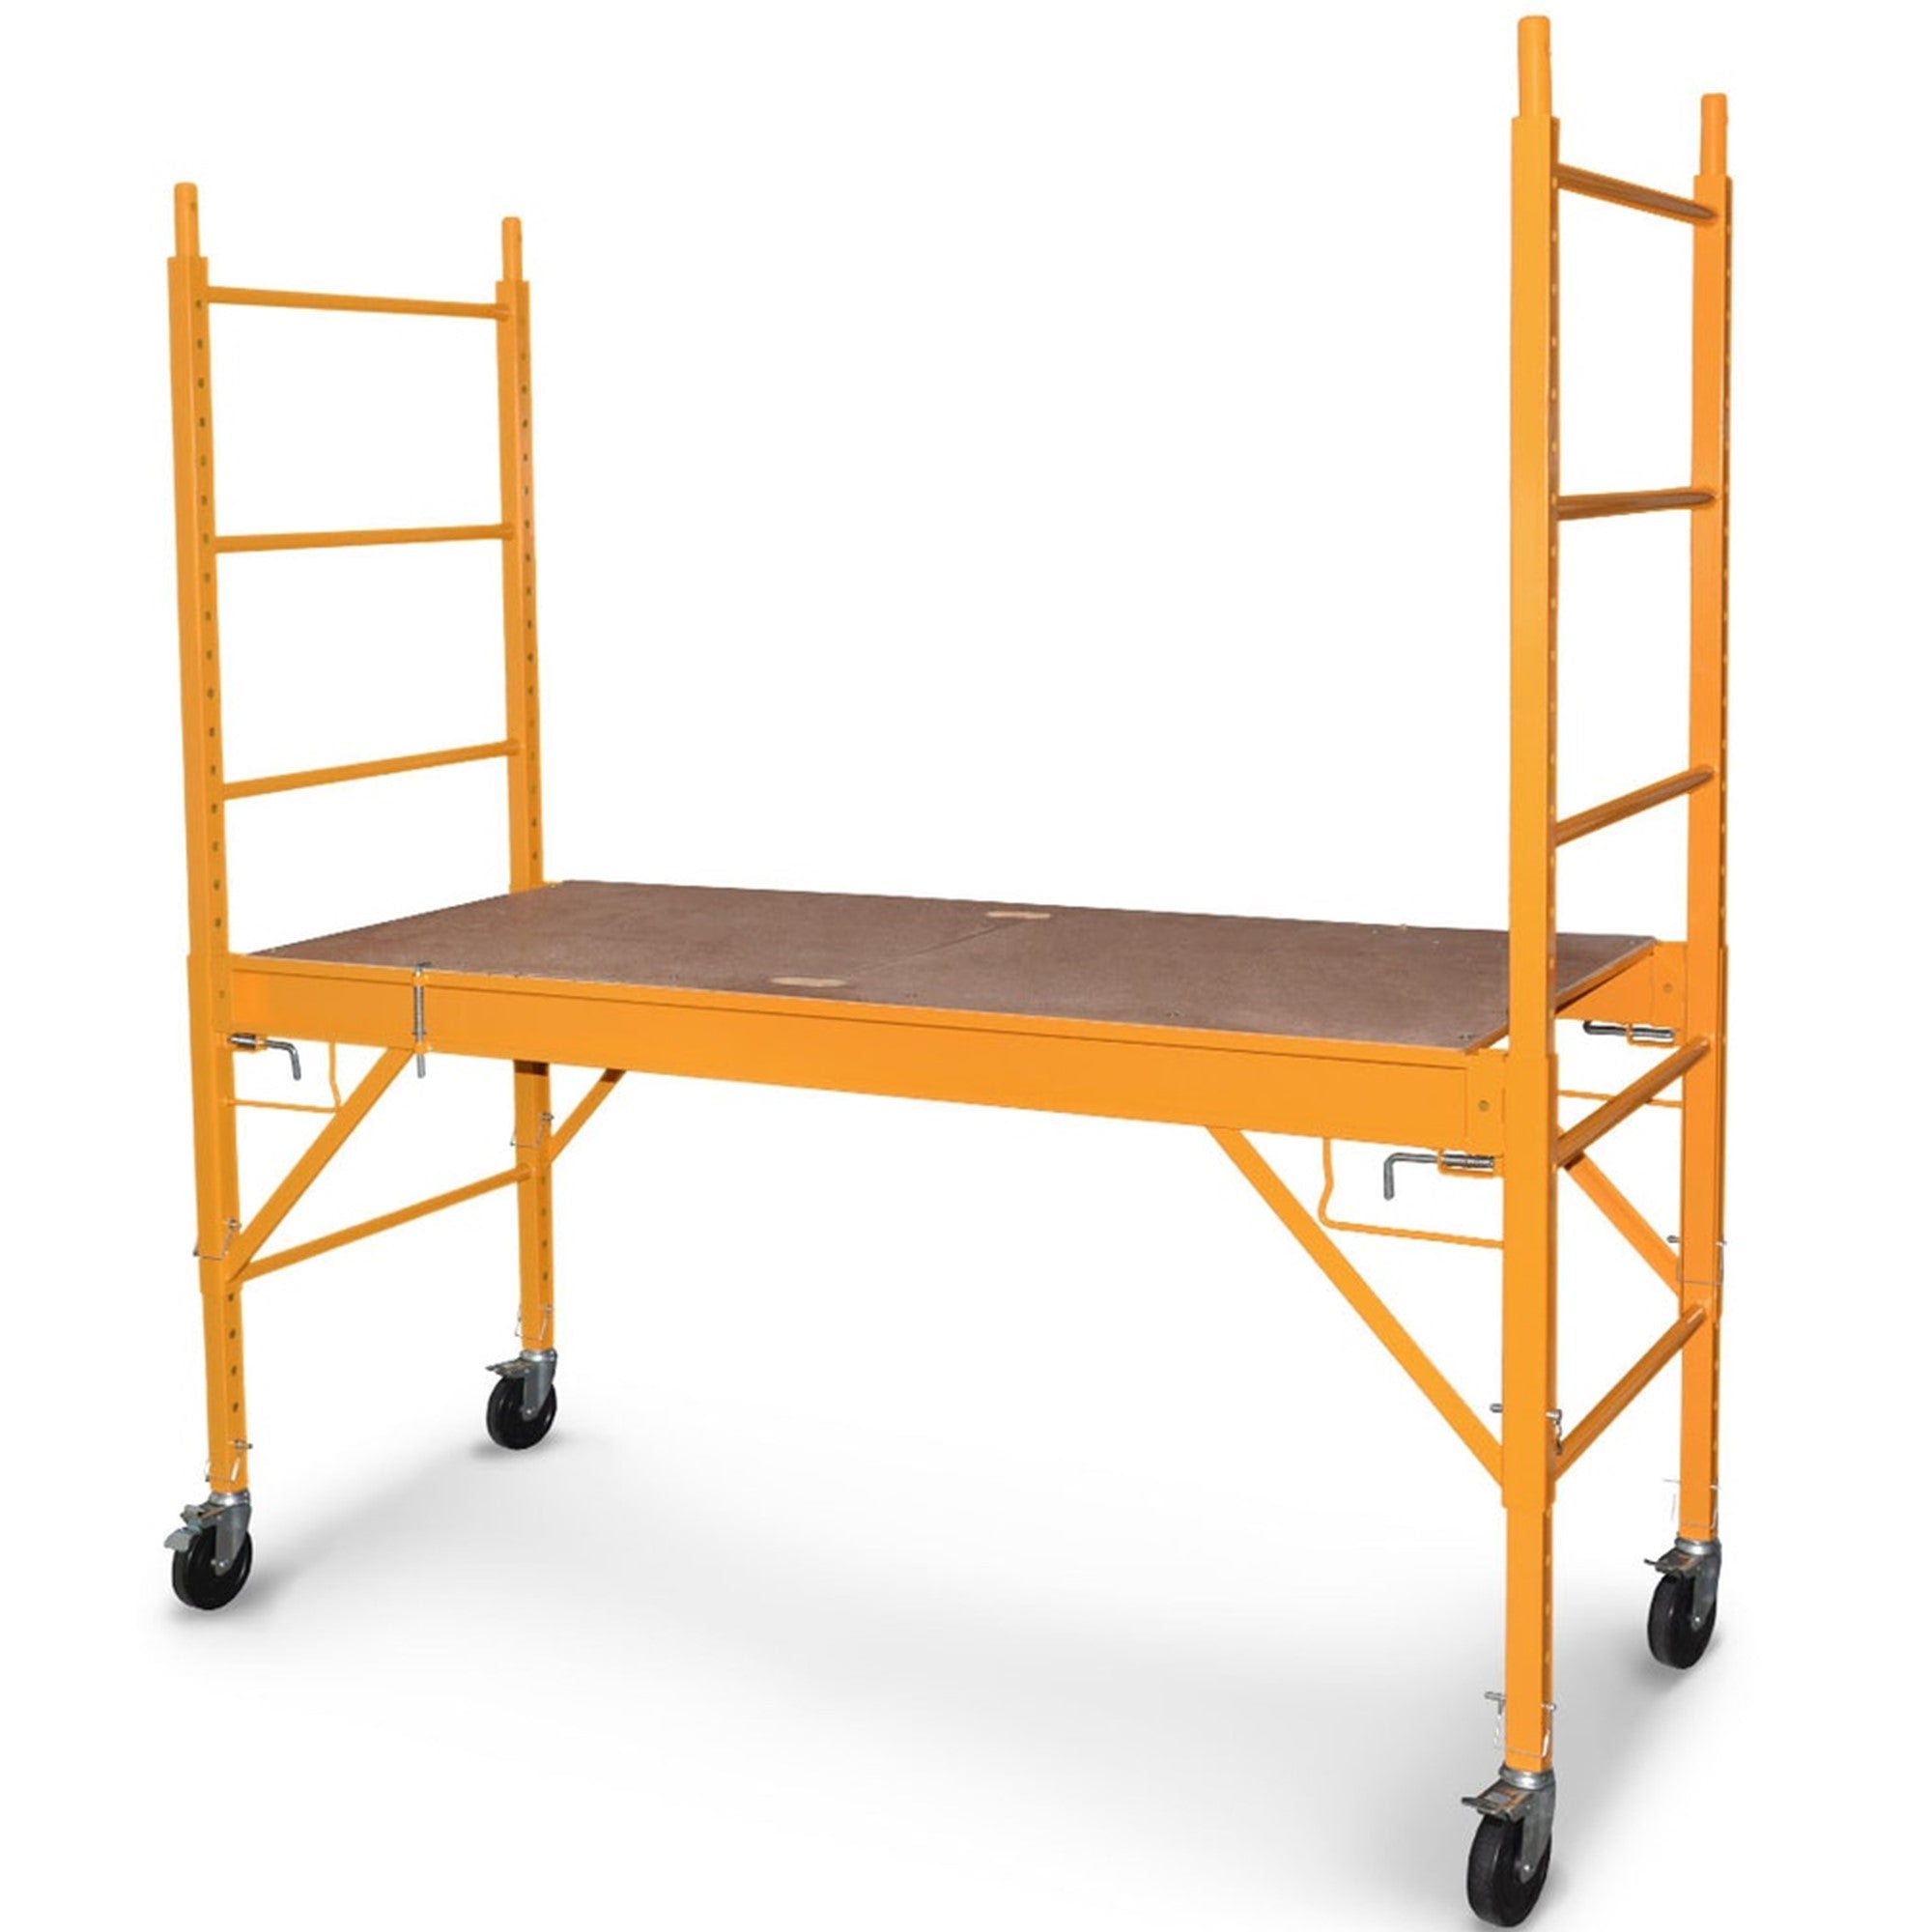 Perfect for all your home DIY projects that call for a bit of extra height. Its platform is adjustable from 70 to 180cm, making it great for indoor and outdoor use such as painting, hanging or cleaning